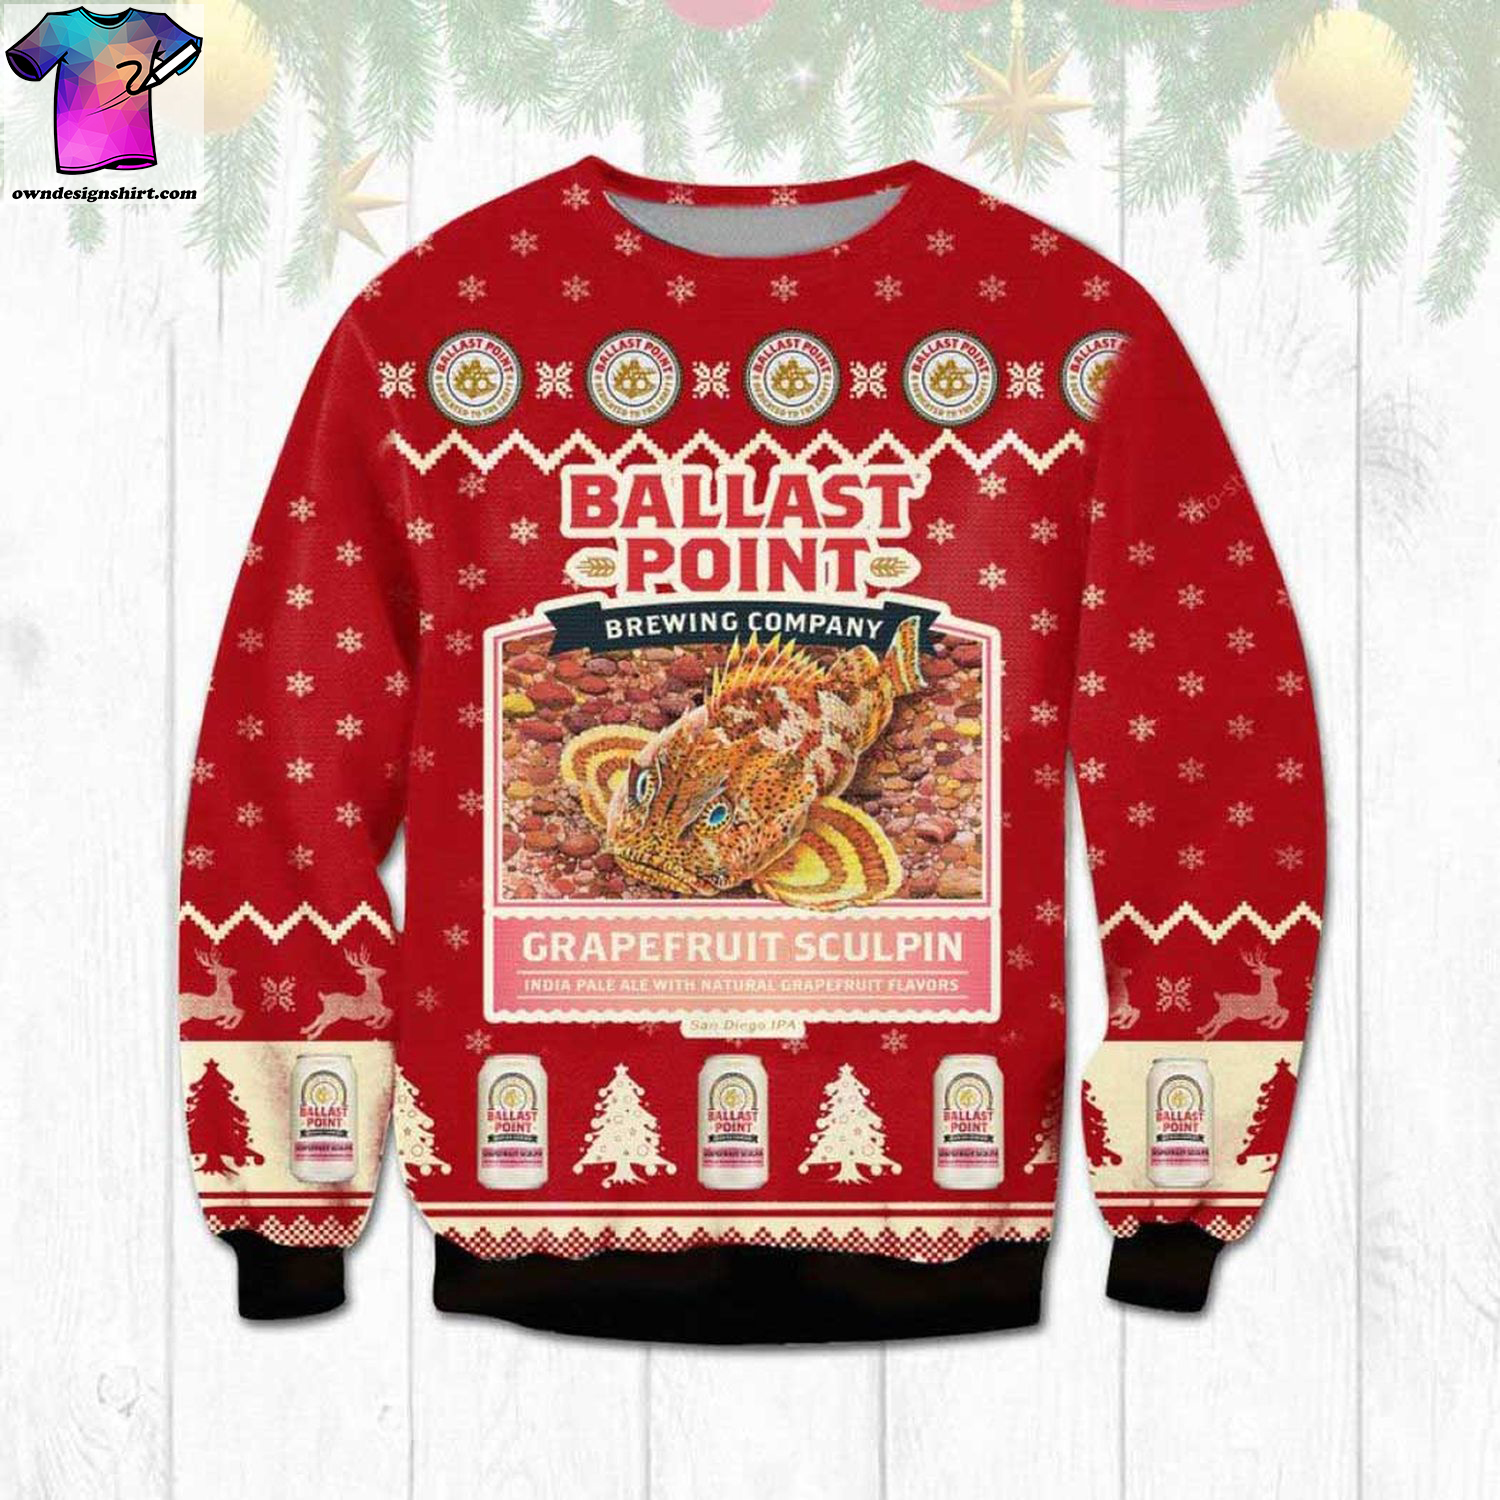 Ballast point grapefruit sculpin brewing company ugly christmas sweater